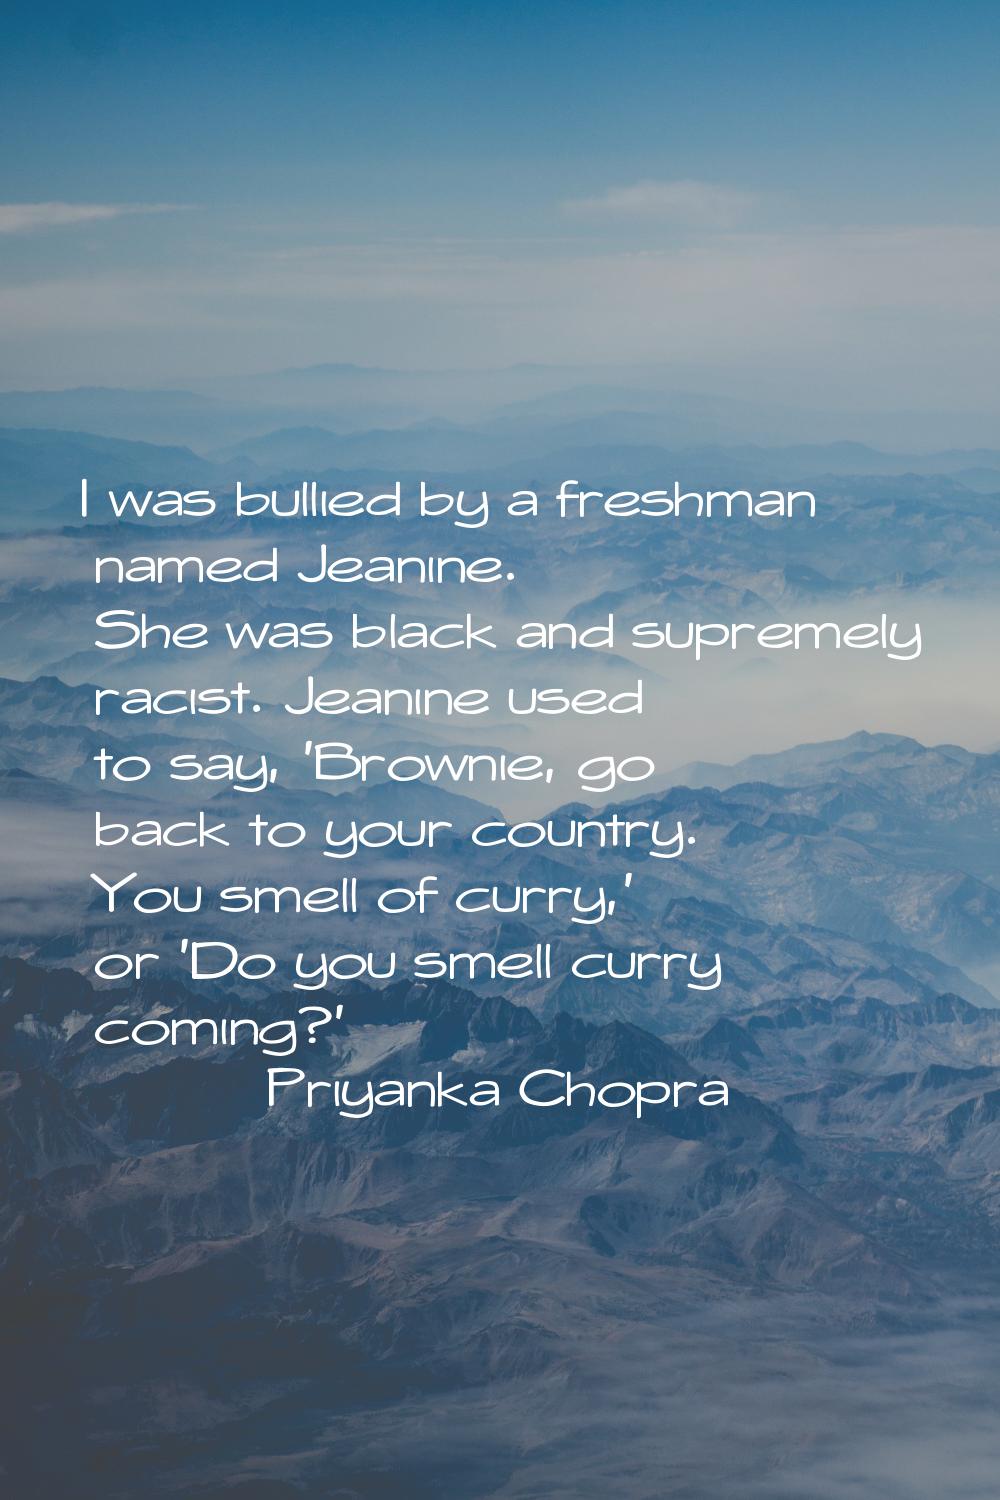 I was bullied by a freshman named Jeanine. She was black and supremely racist. Jeanine used to say,